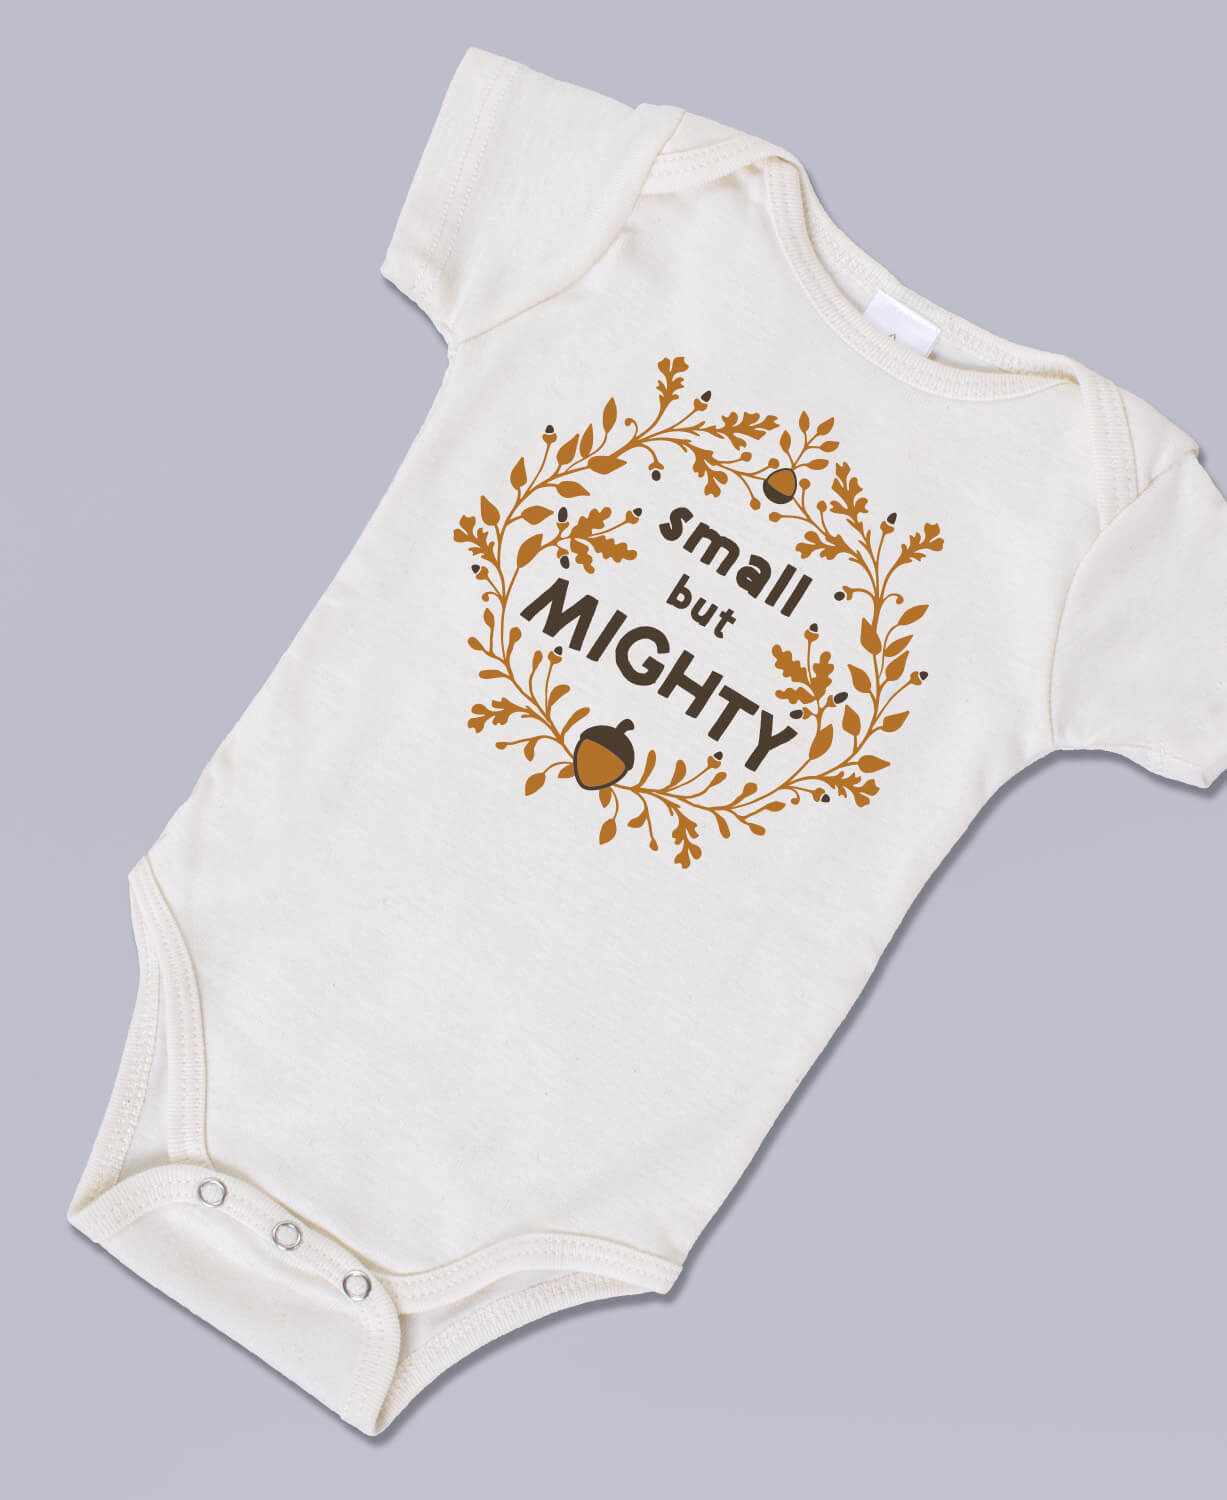 Small But Mighty Organic Baby Bodysuit